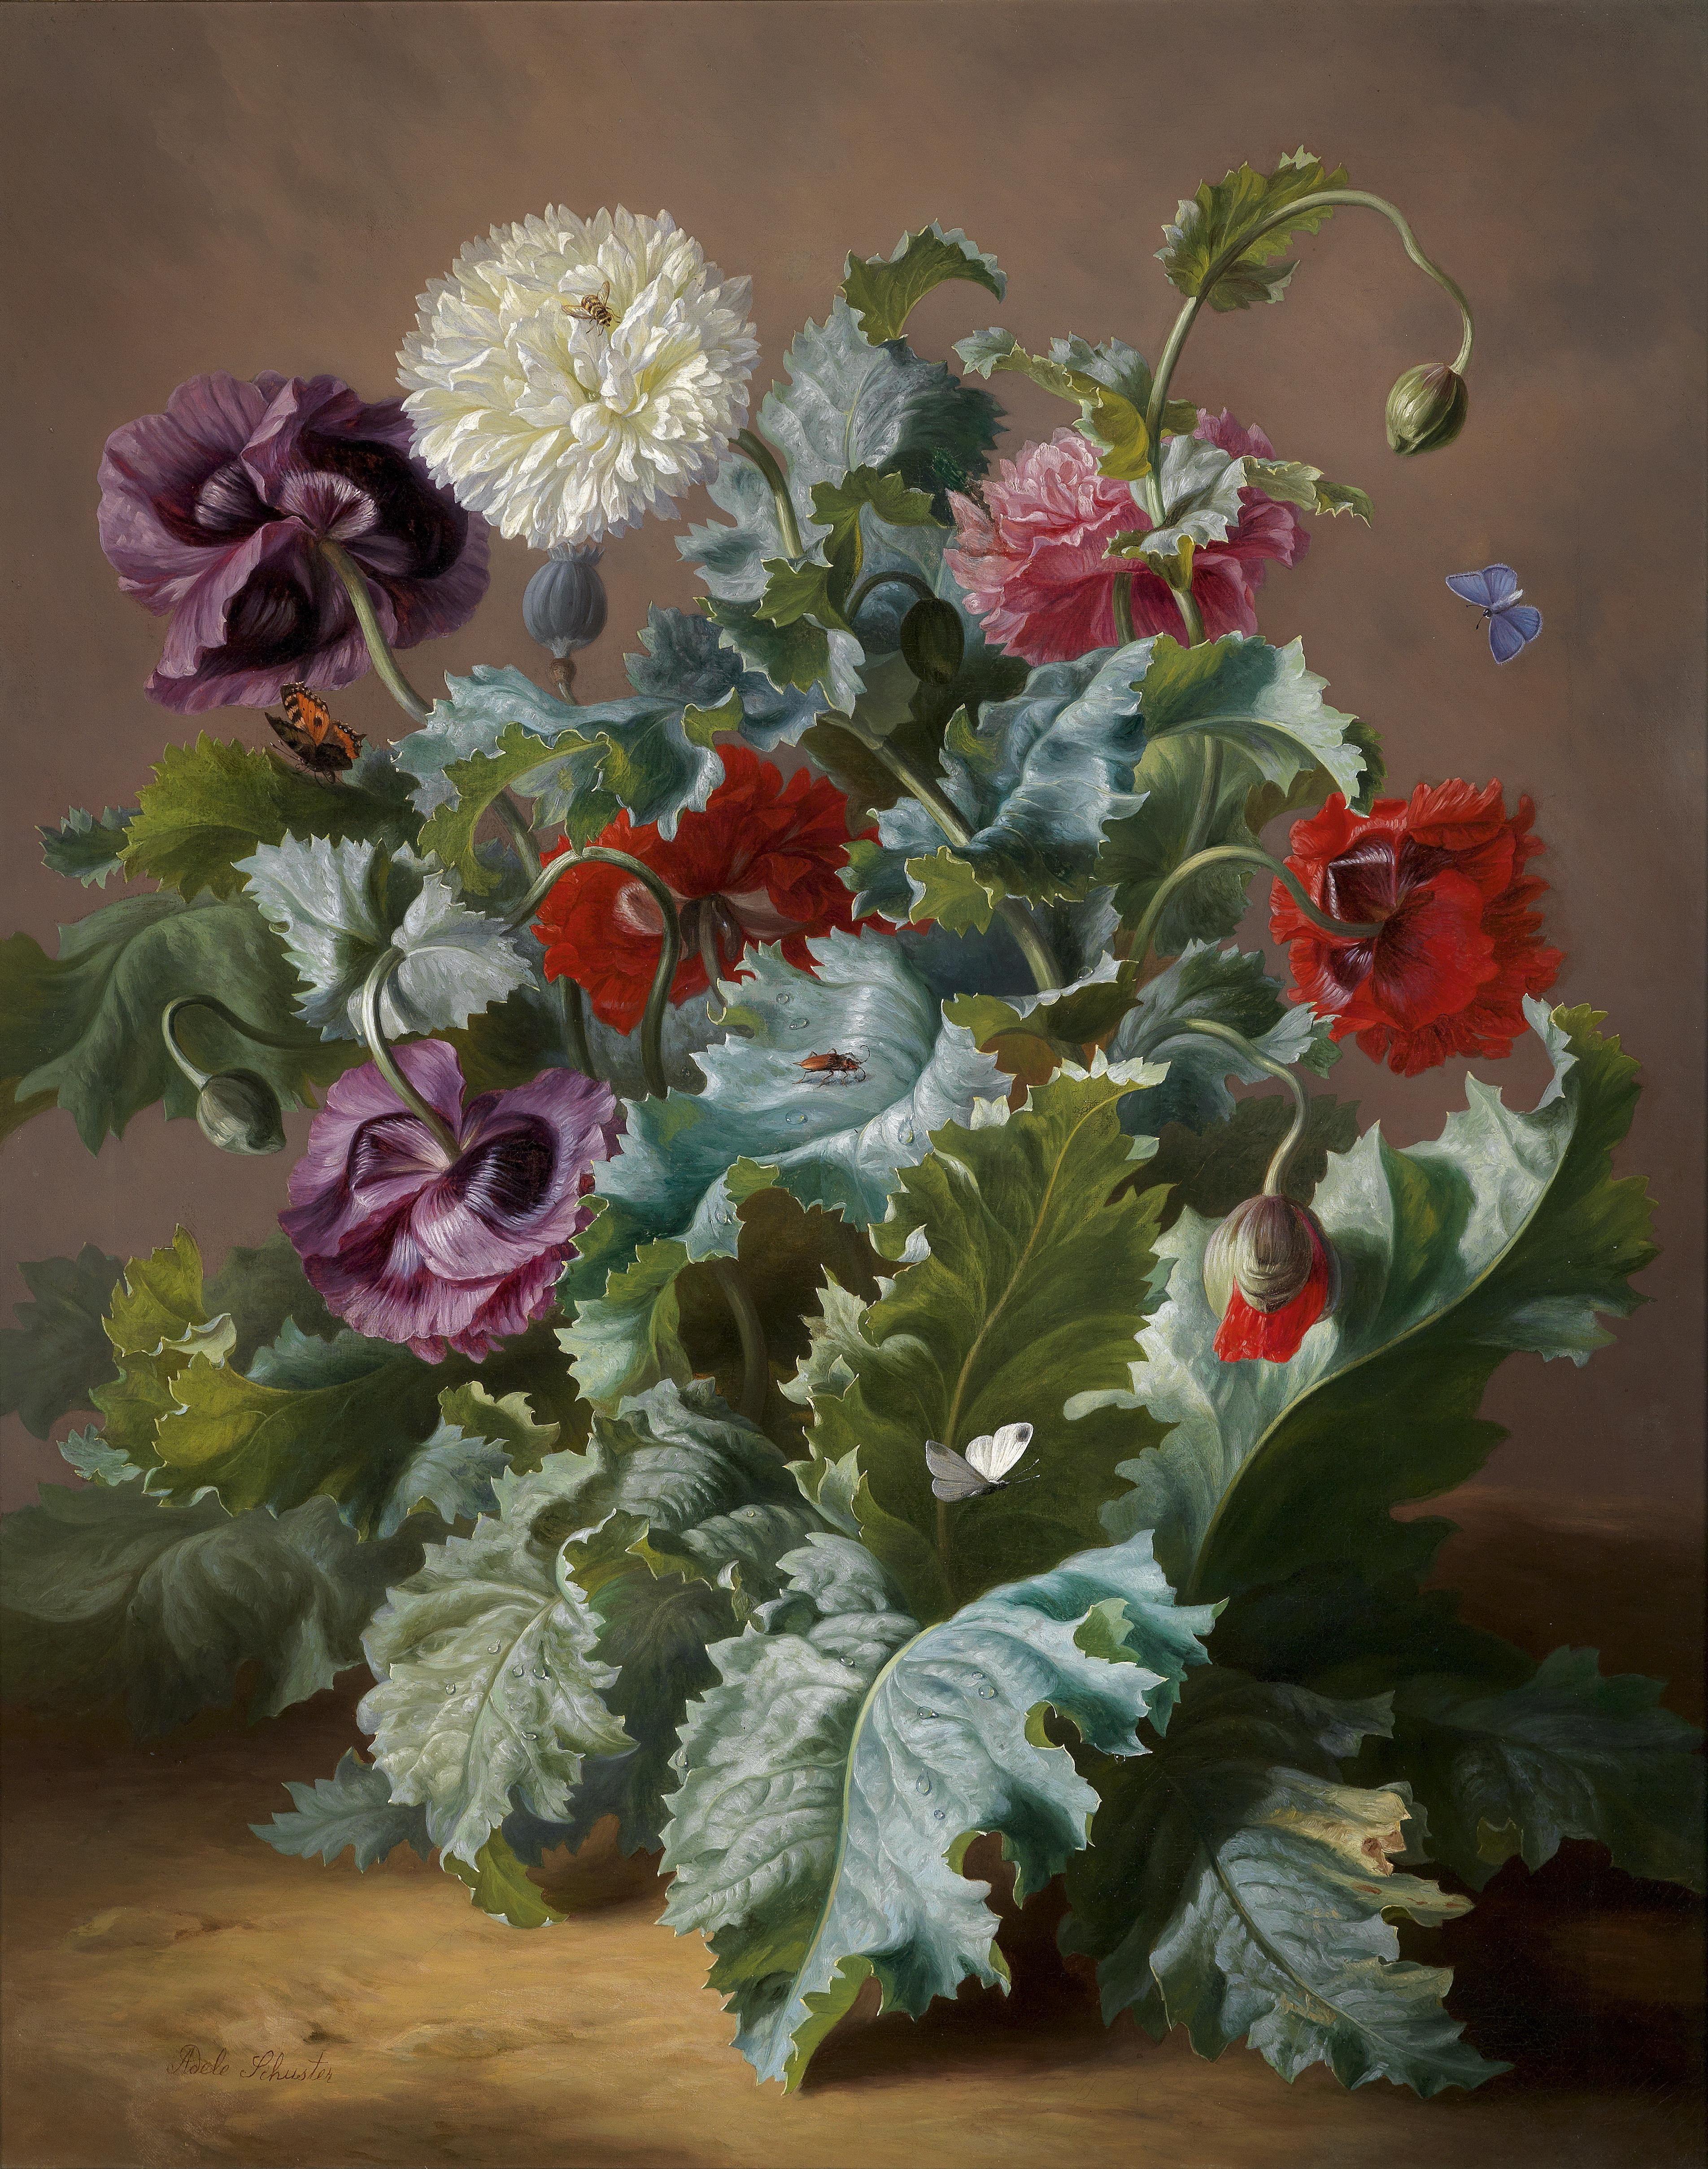 24 Spectacular Vase Of Flowers by De Heem Mural 2024 free download vase of flowers by de heem mural of adele schuster 1812 1890 flower piece with poppies and within adele schuster 1812 1890 flower piece with poppies and butterflies